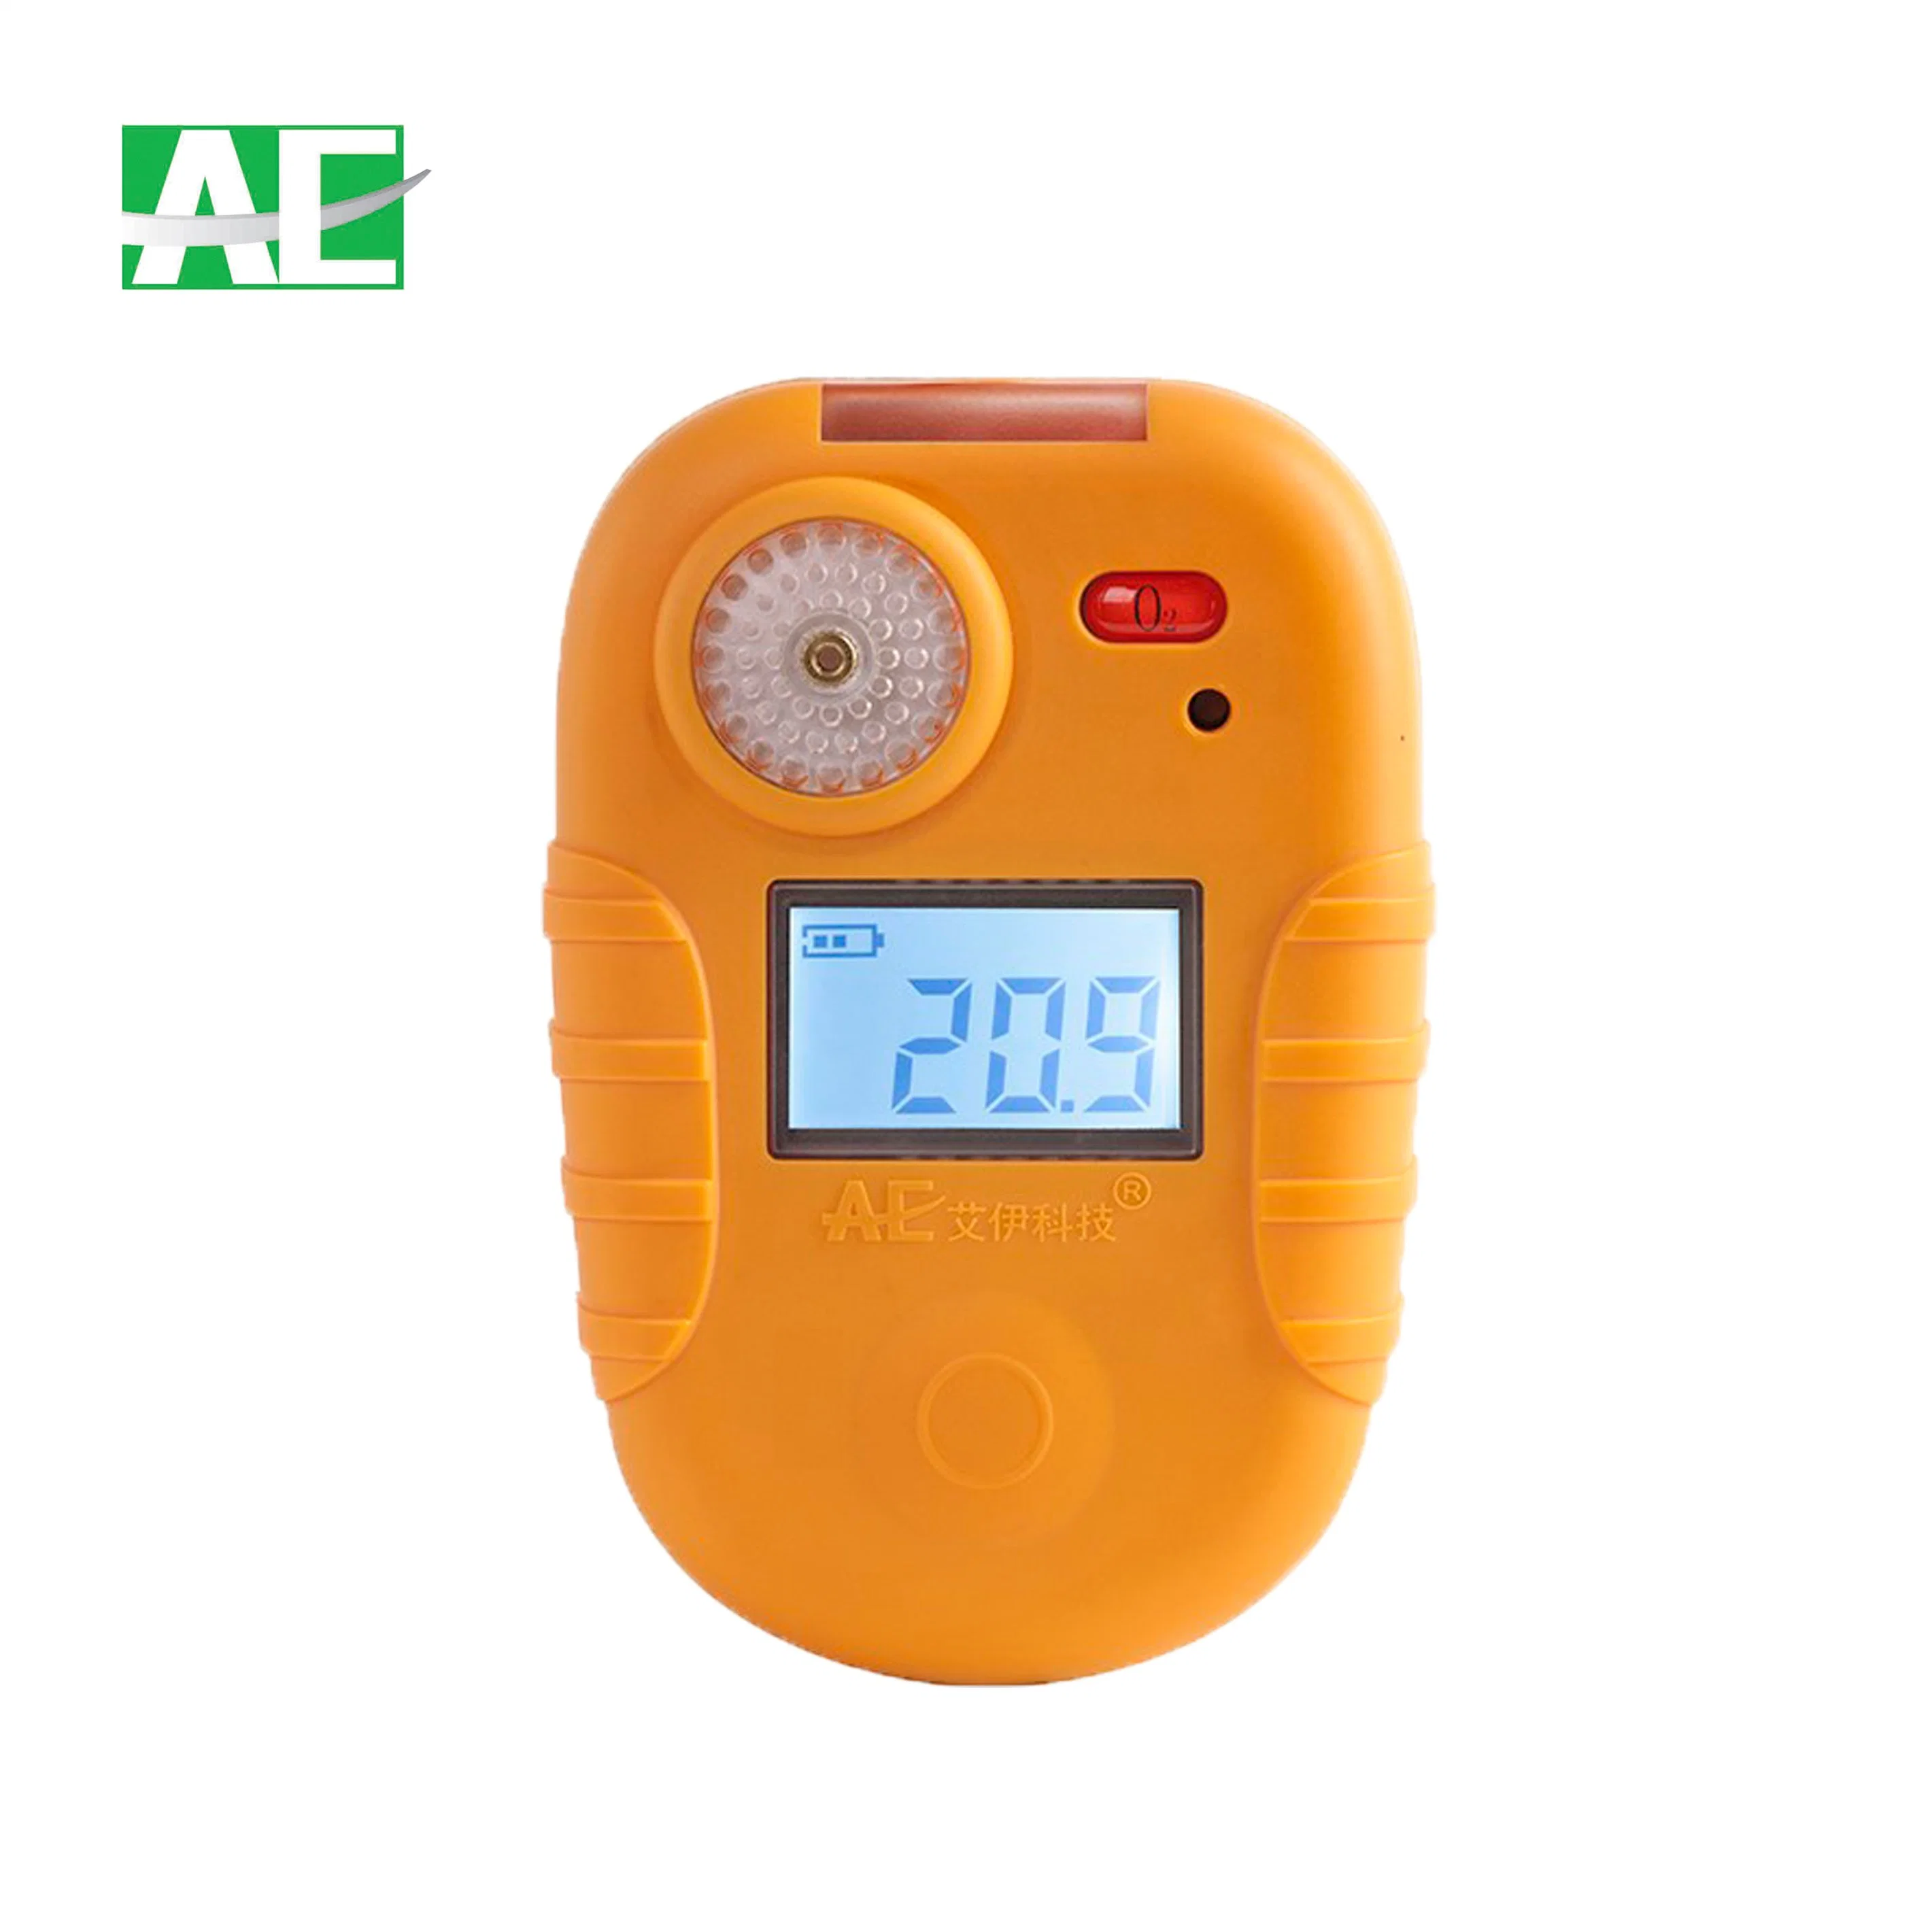 Testing Equipment of Diffusion Type No2 Nitrogen Dioxide Portable Gas Detector